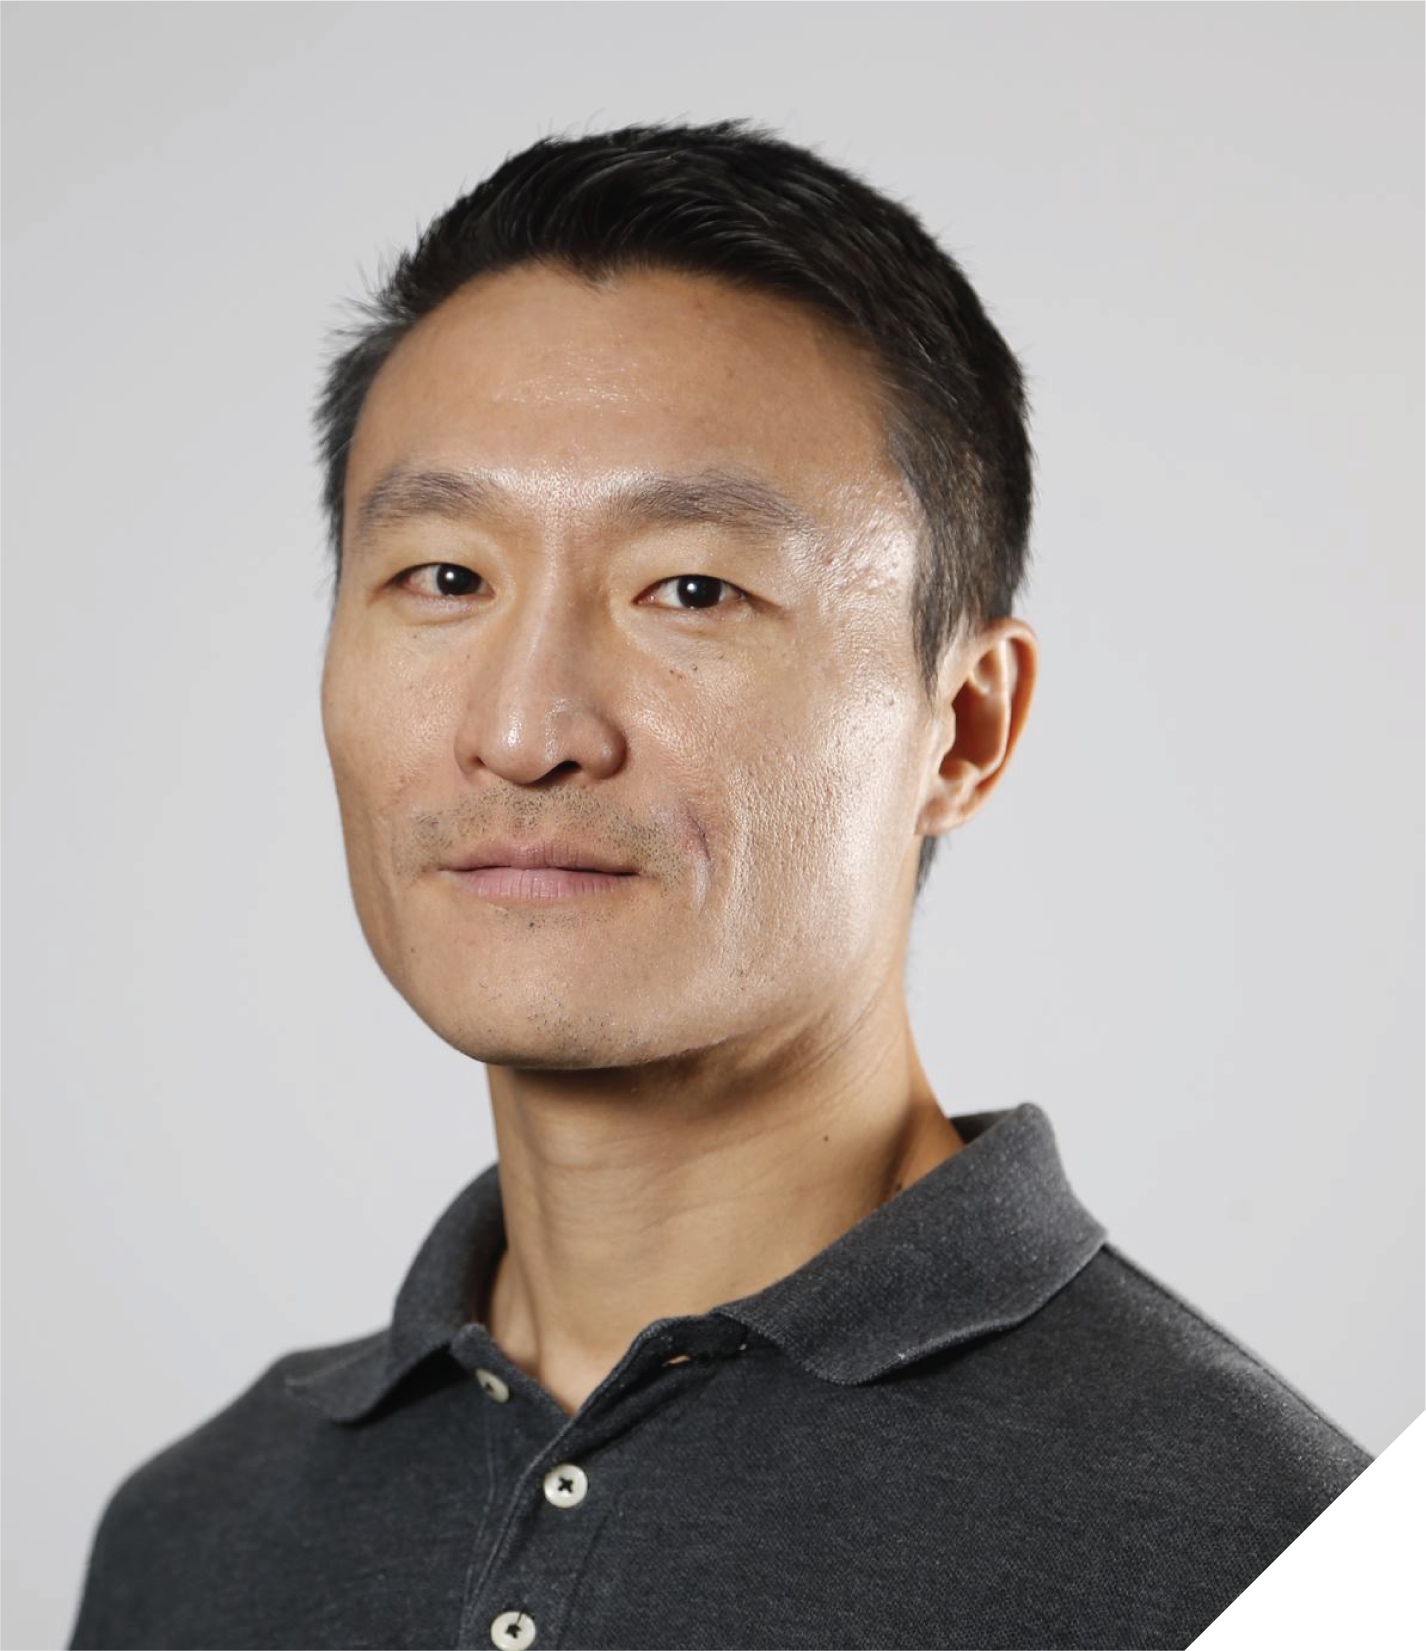 Ohio State faculty Lin Ding headshot